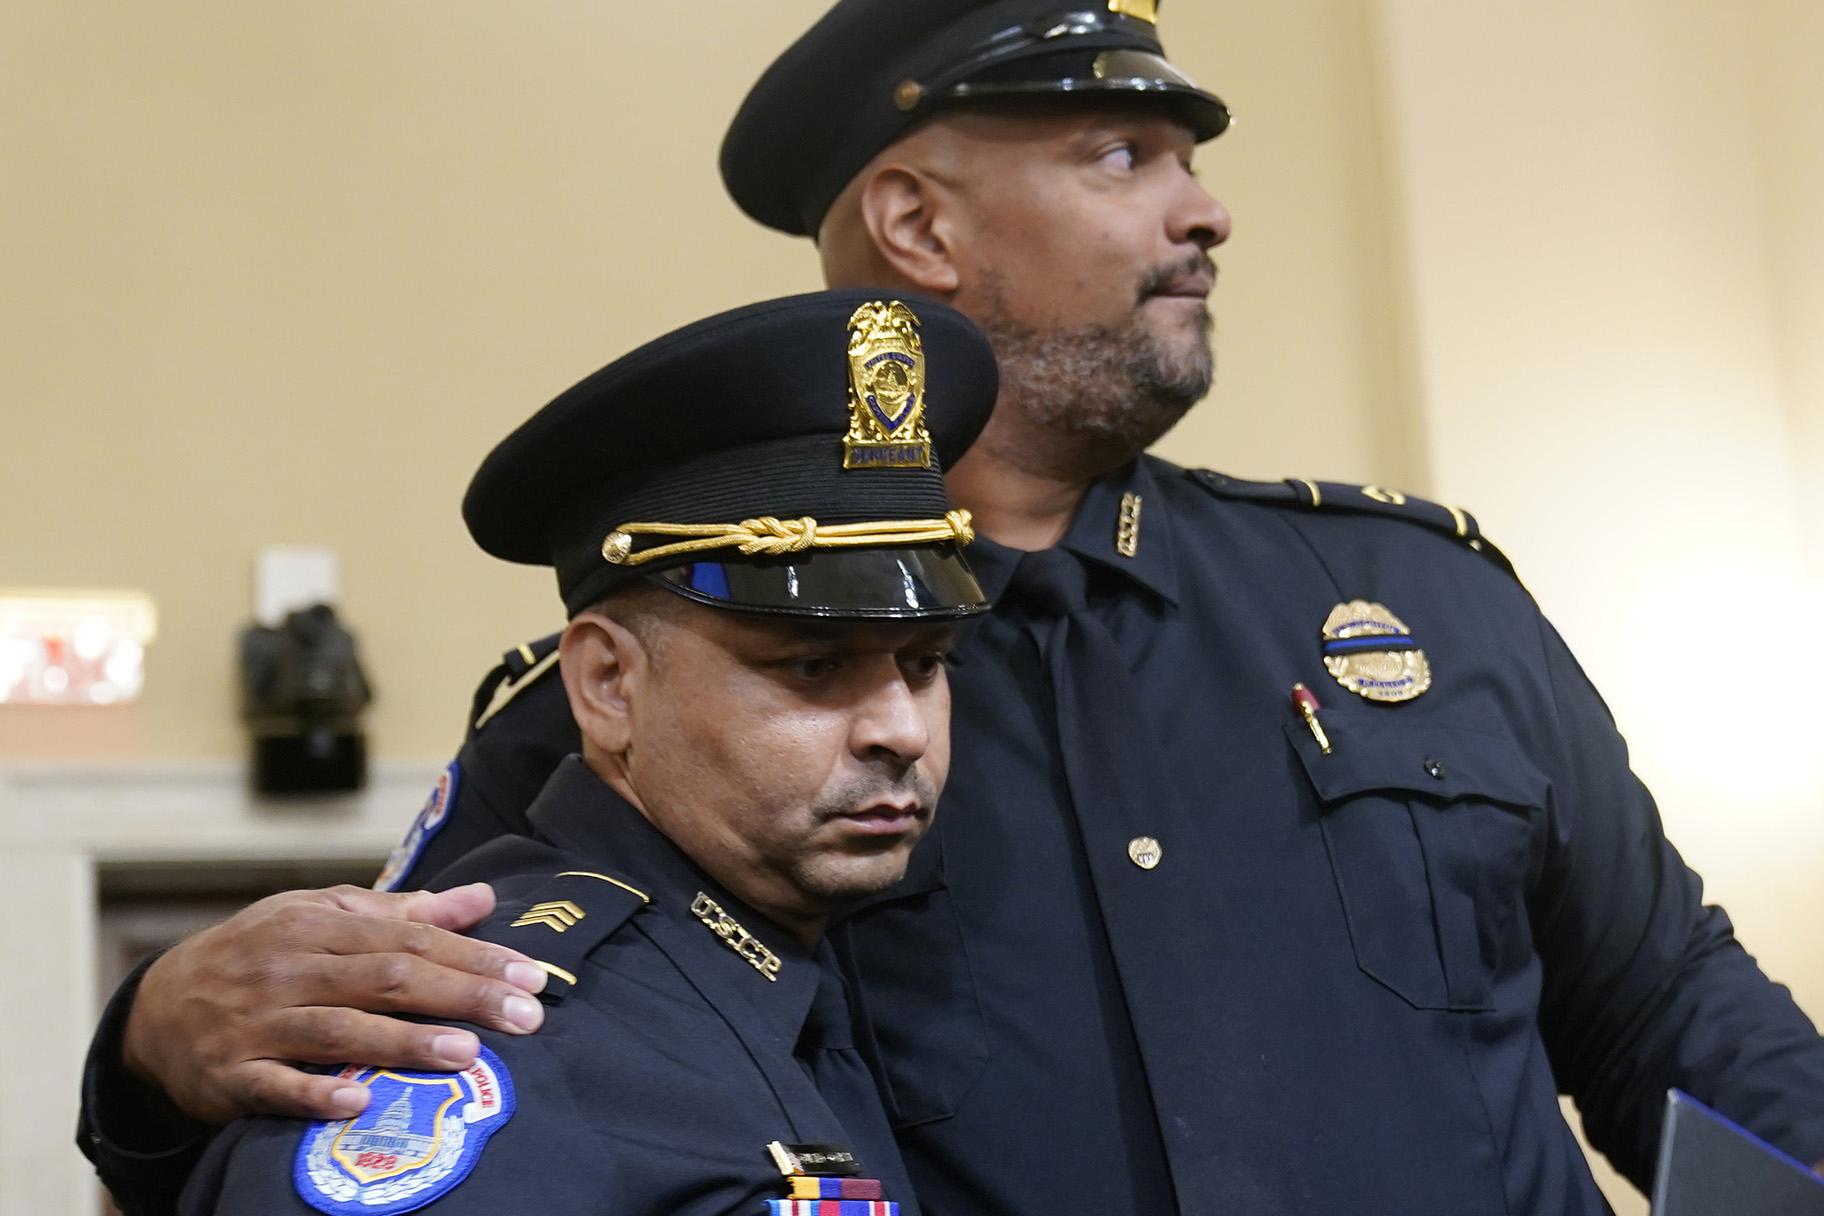 U.S. Capitol Police Sgt. Aquilino Gonell left, and U.S. Capitol Police Sgt. Harry Dunn stand after the House select committee hearing on the Jan. 6 attack on Capitol Hill in Washington, Tuesday, July 27, 2021. (AP Photo / Andrew Harnik, Pool)